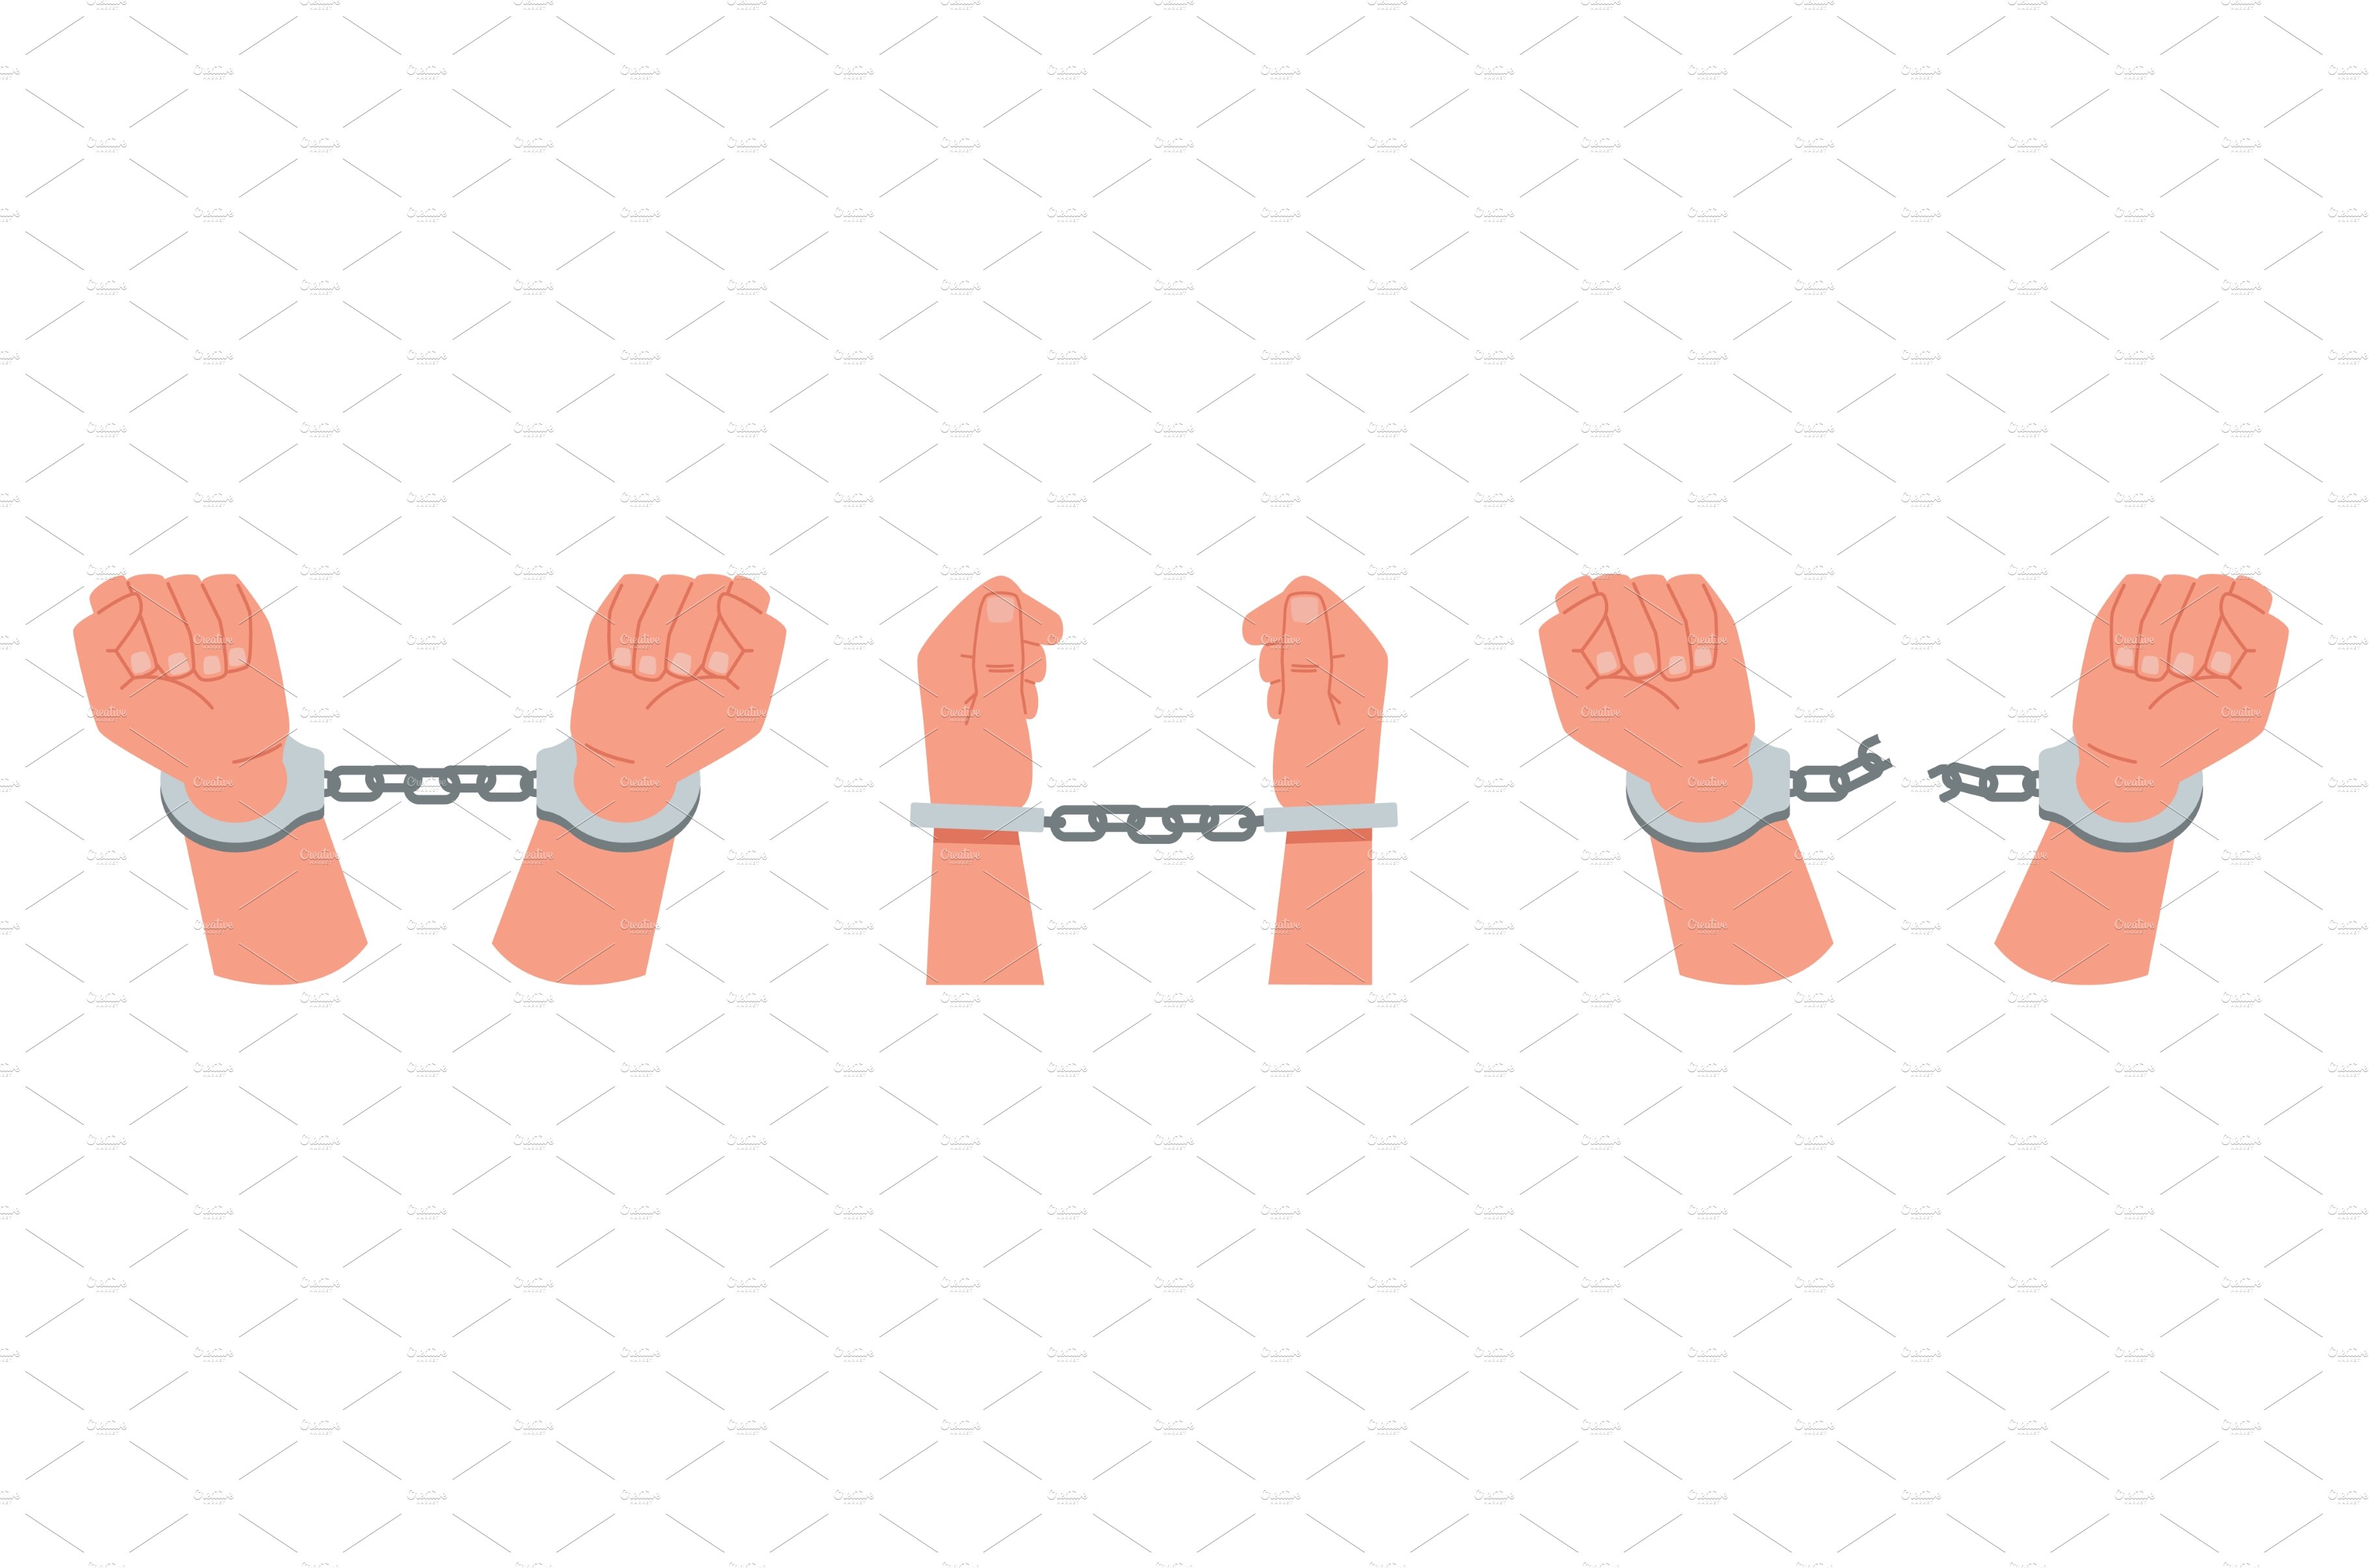 Handcuffed hand set, prisoners arms cover image.